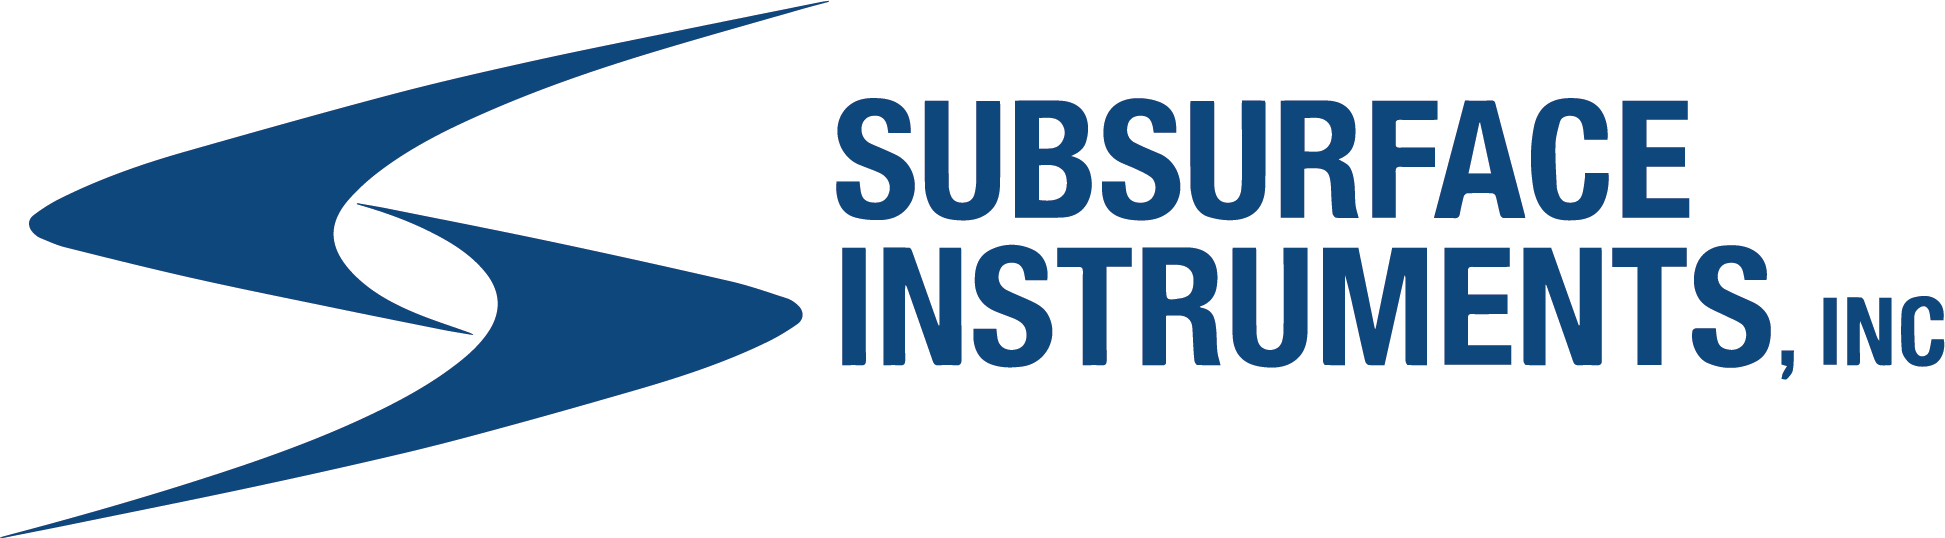 SUBSURFACE INSTRUMENTS INC